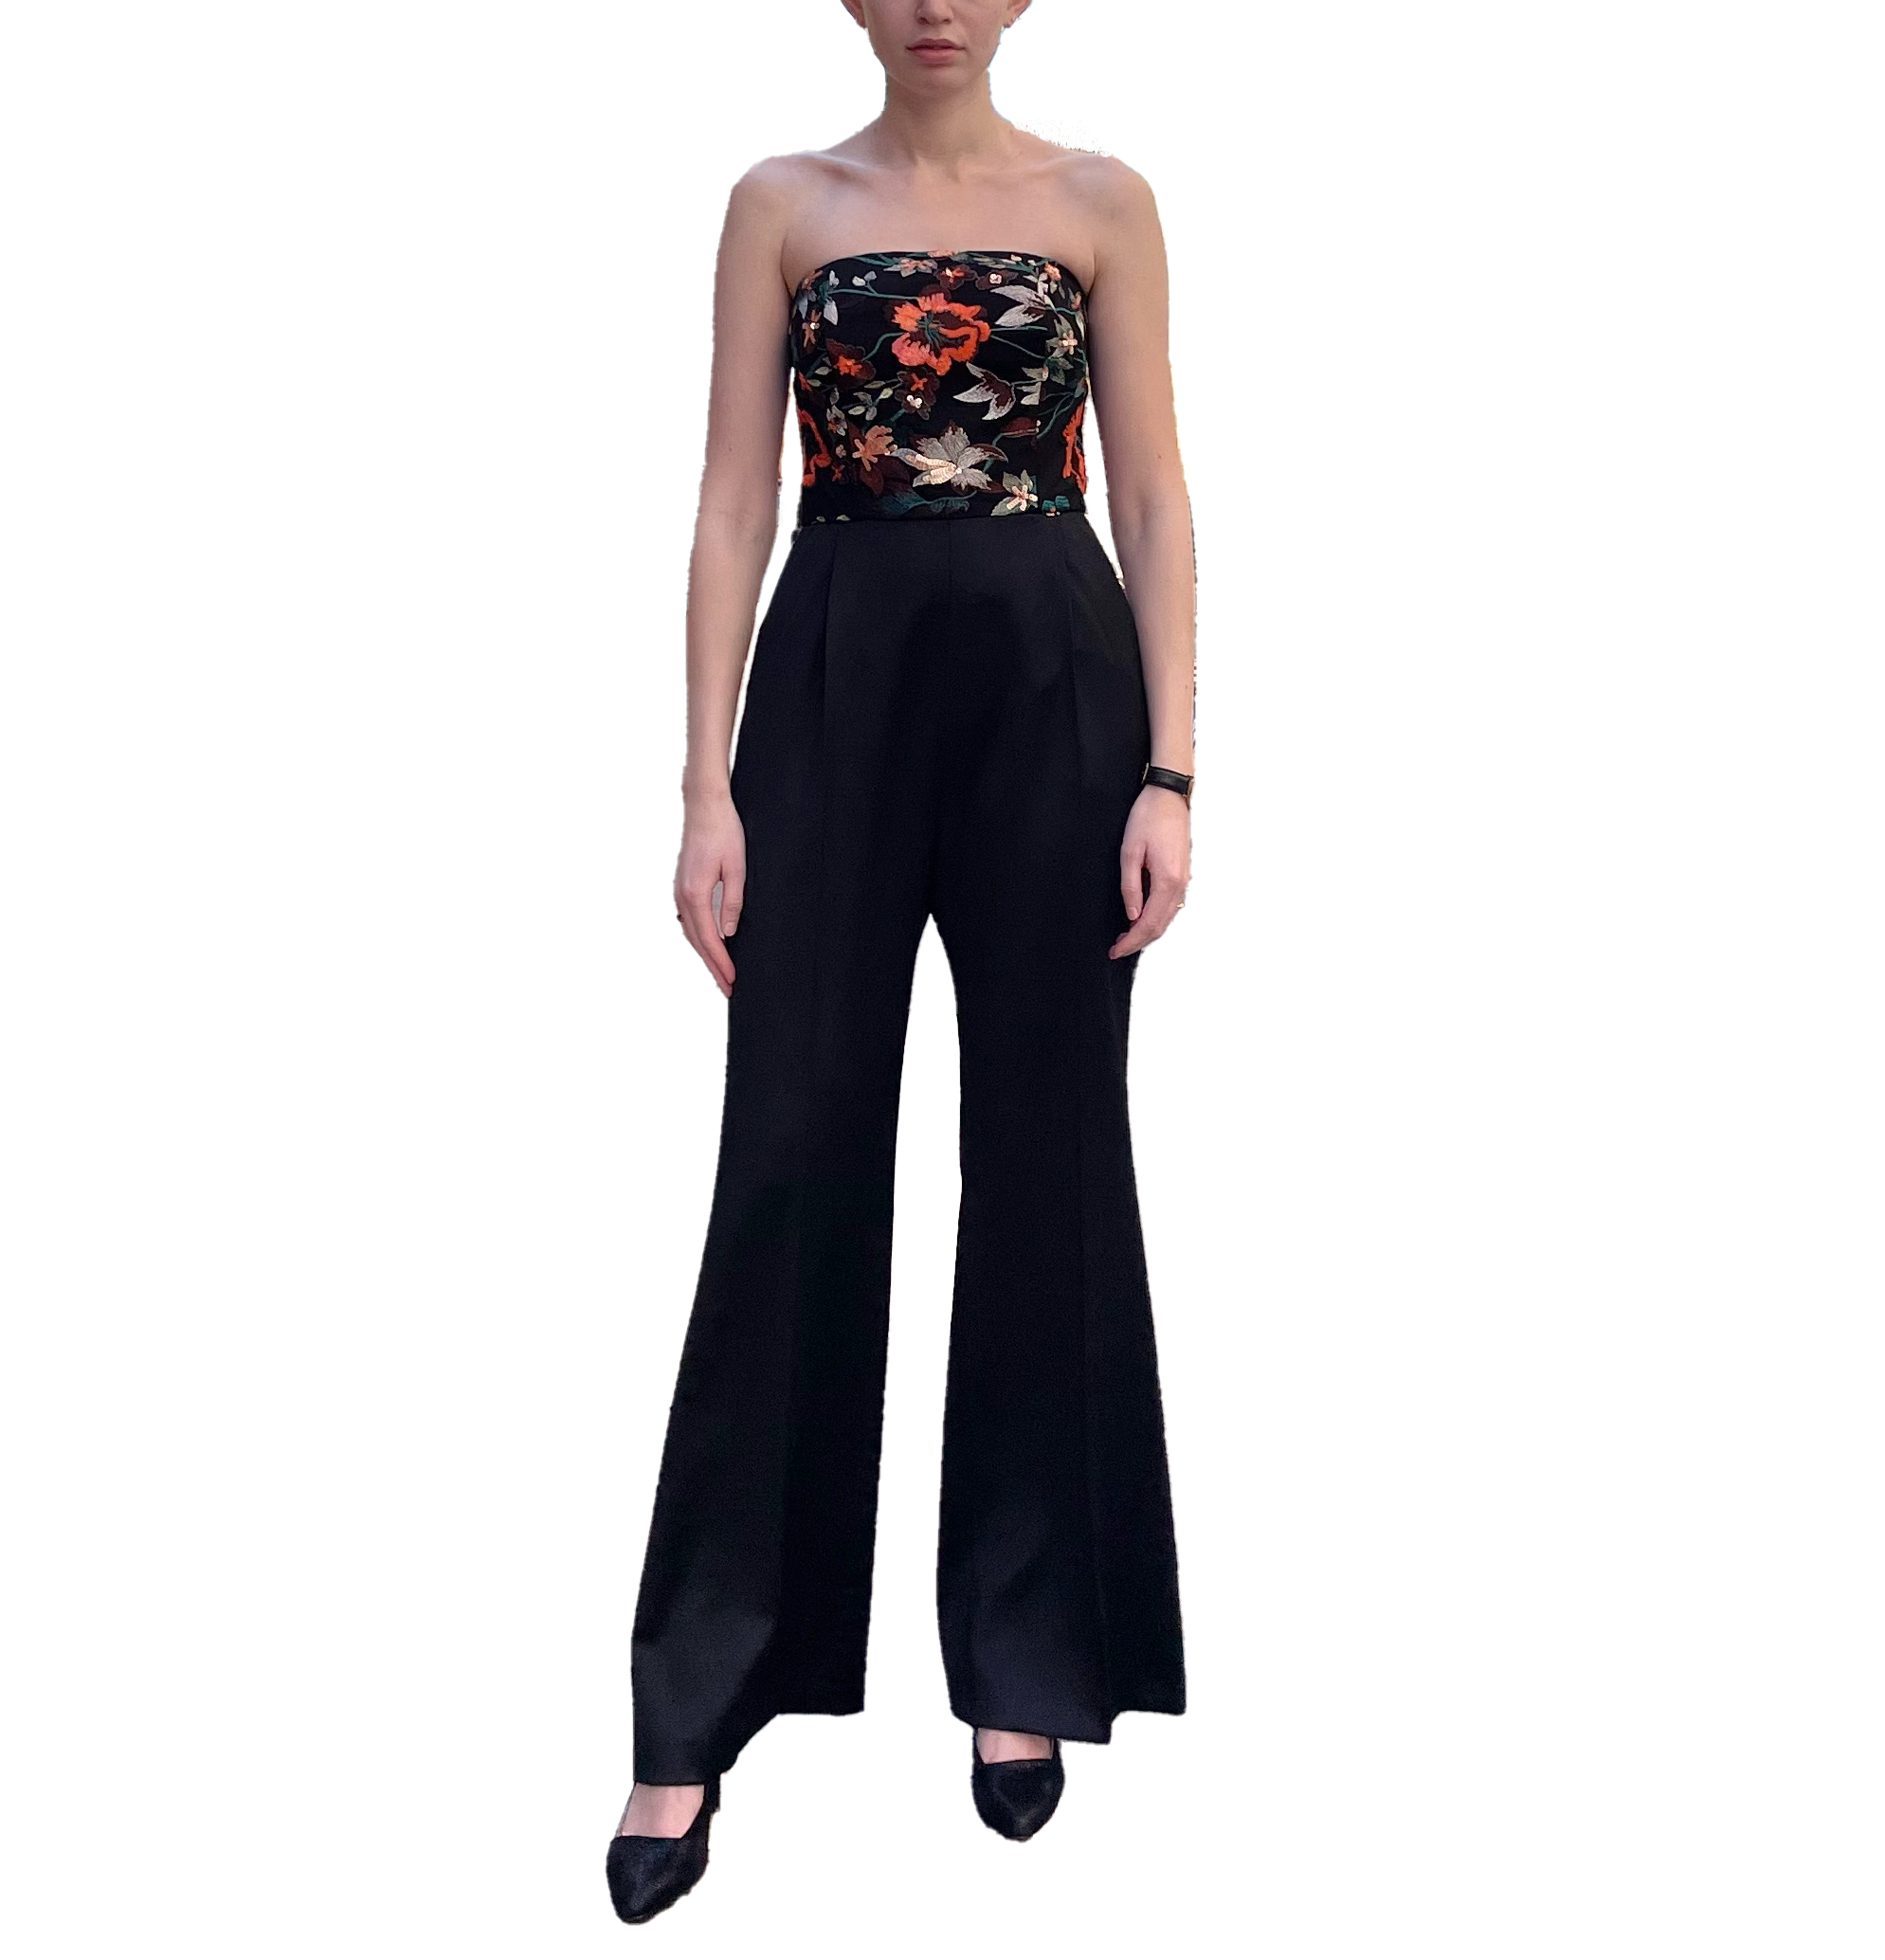 Jumpsuit with lace covered top by Thi Thao Copenhagen